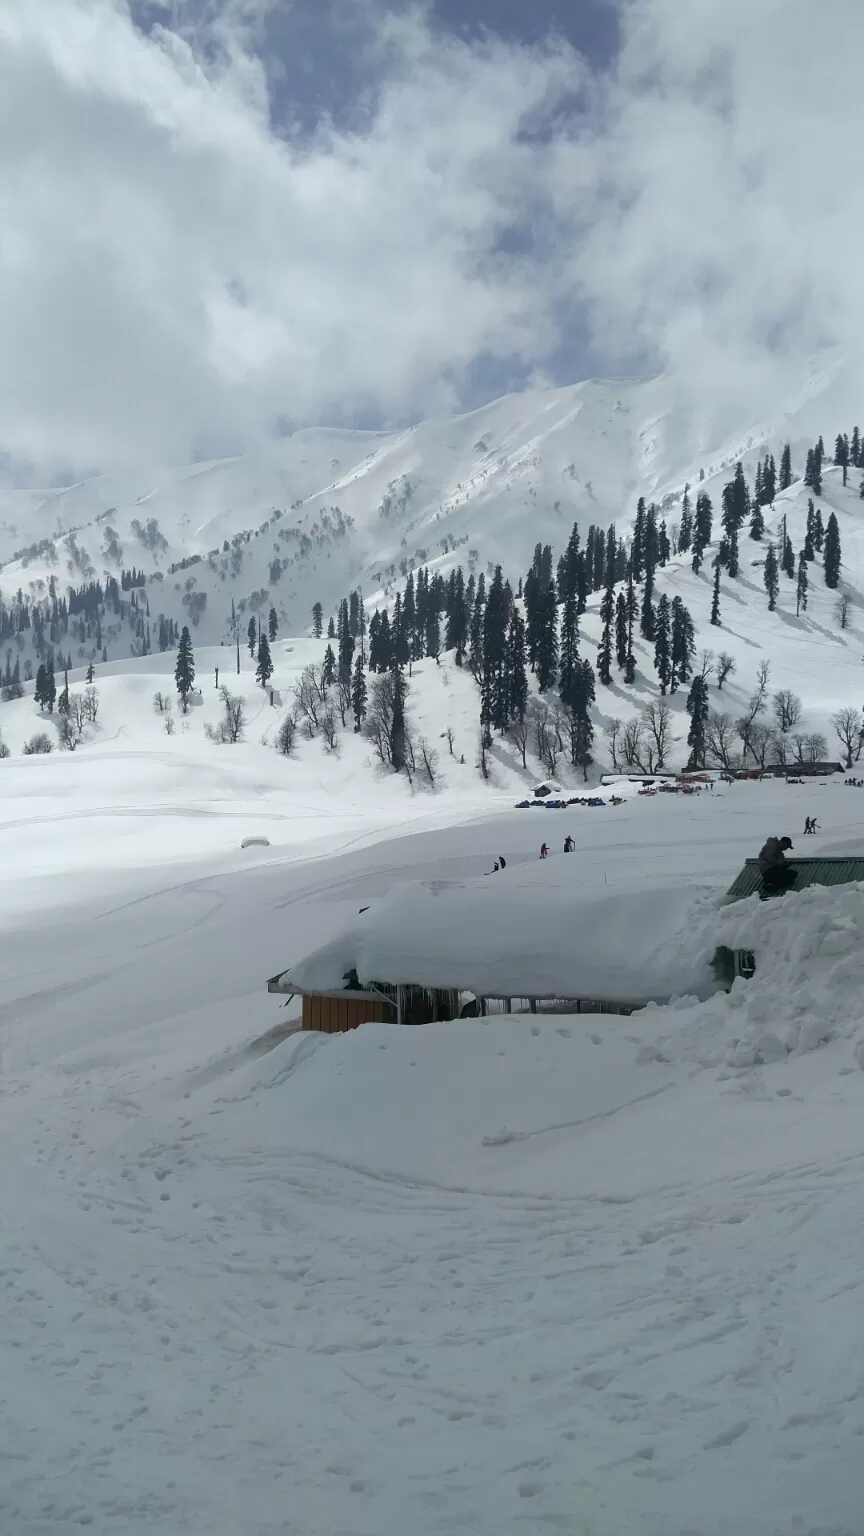 Photo of Khilanmarg By Deepesh dhonde